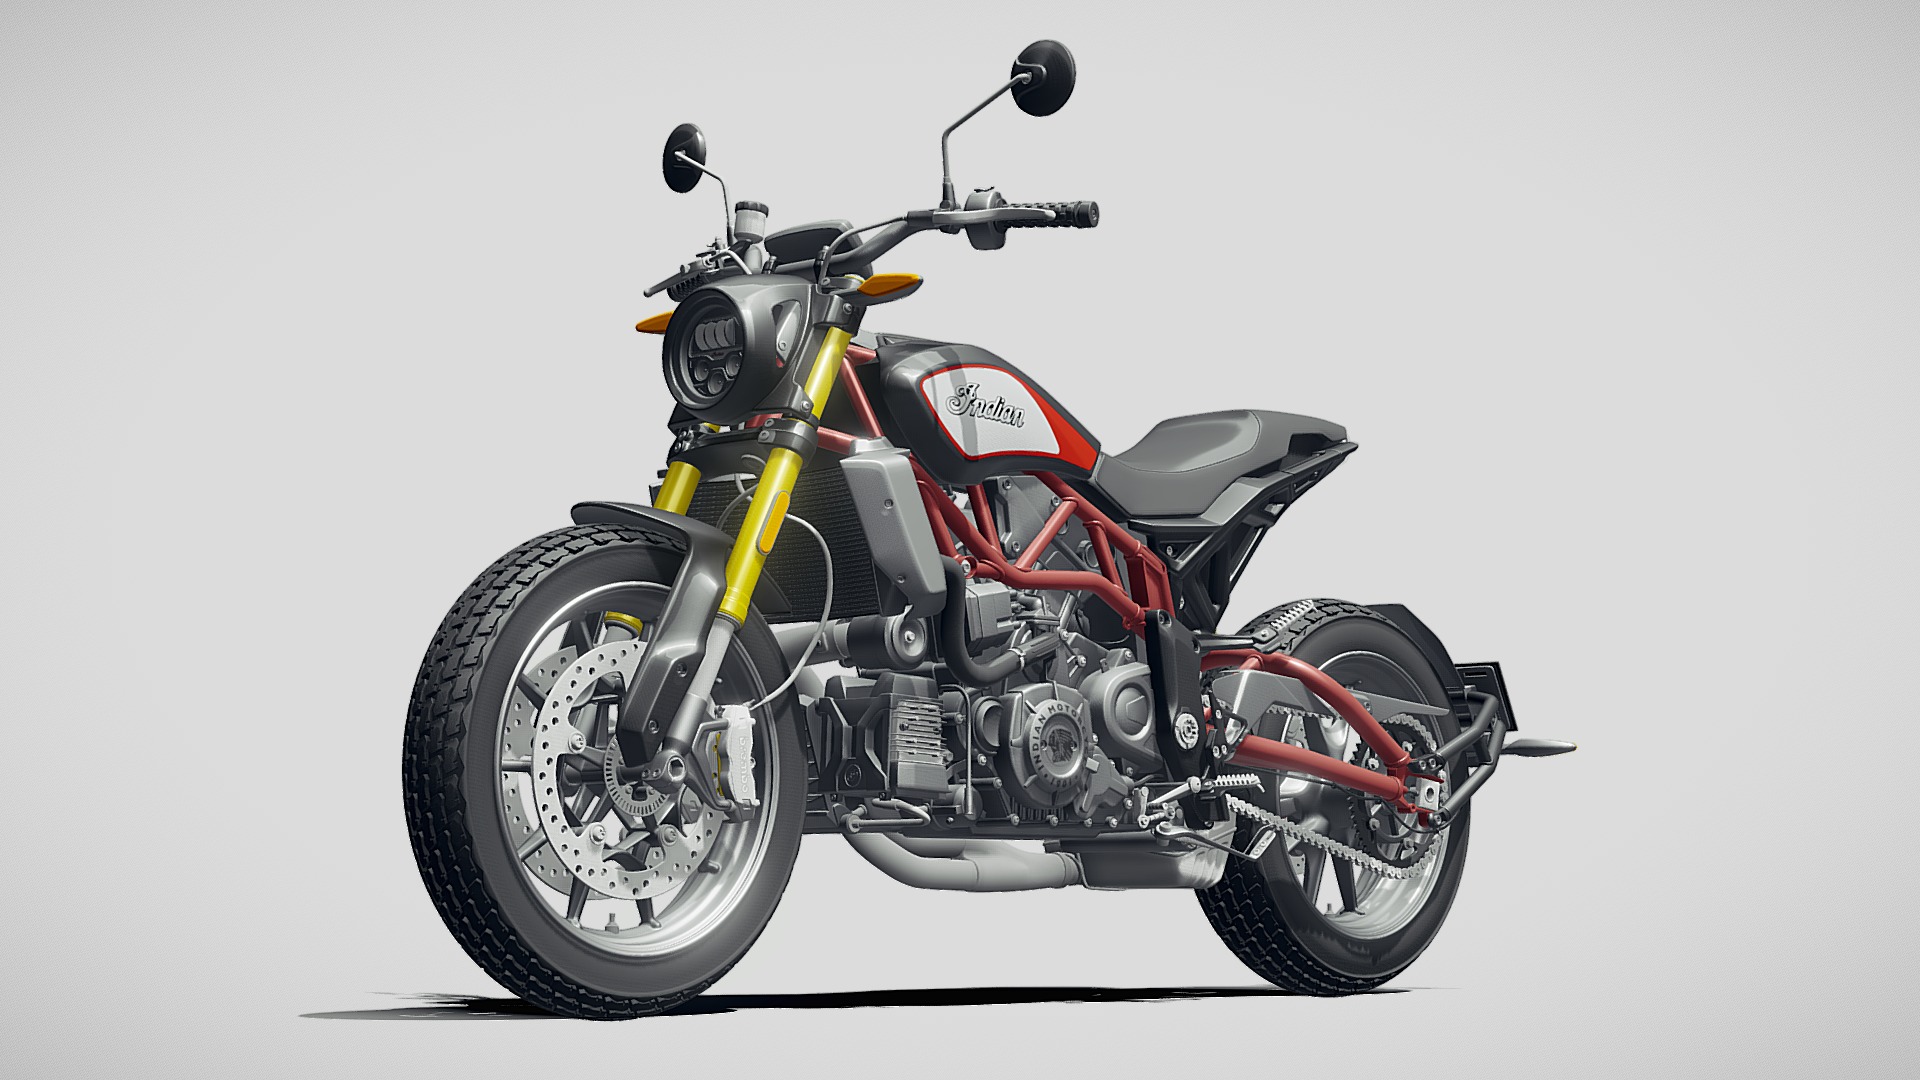 3D model Indian FTR 1200 S 2019 - This is a 3D model of the Indian FTR 1200 S 2019. The 3D model is about a red and black motorcycle.